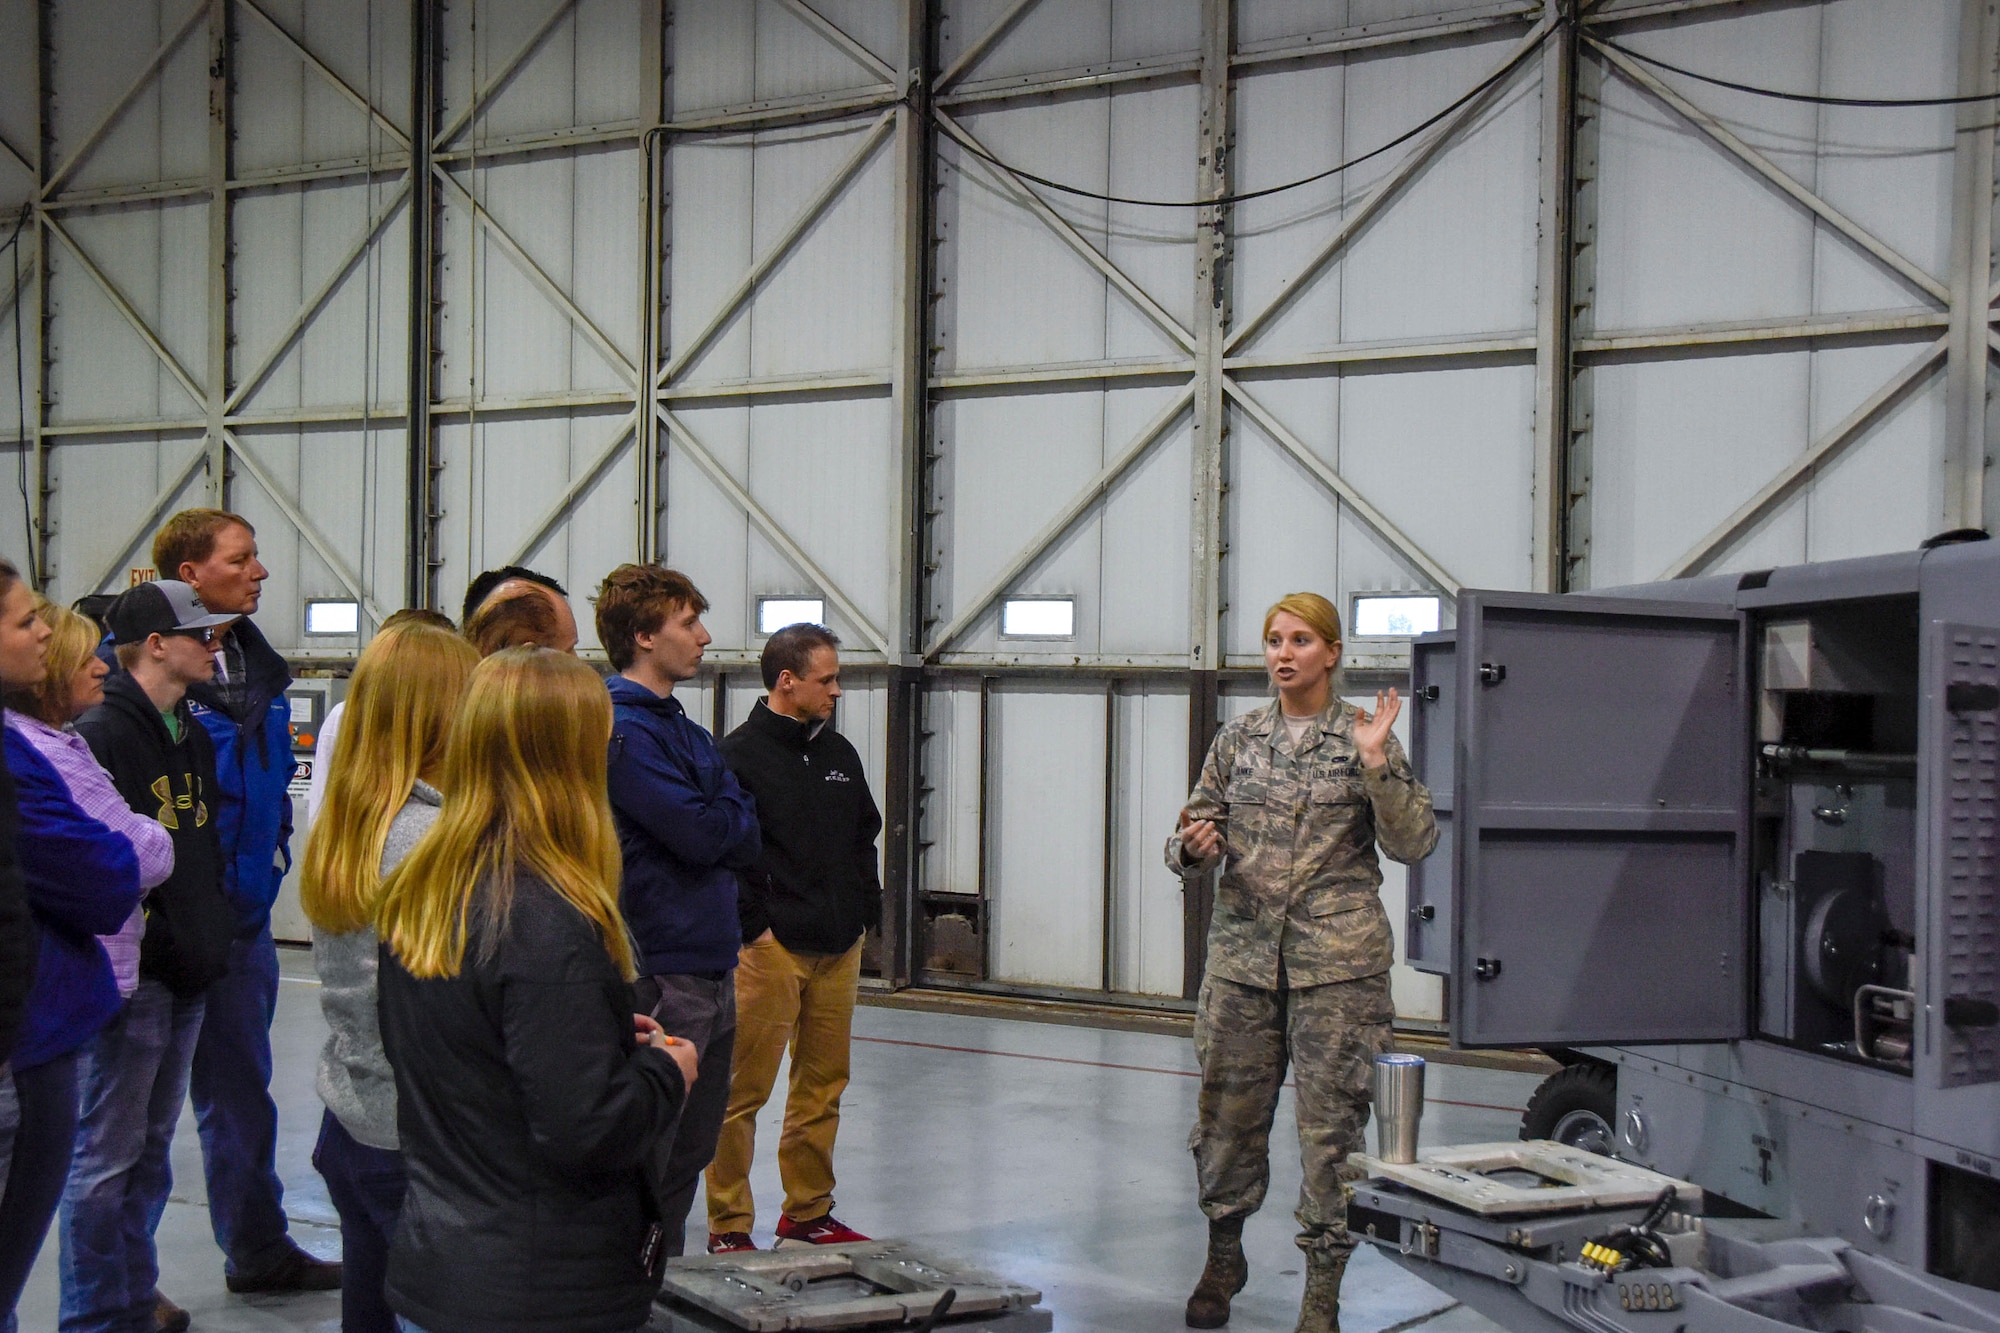 Staff Sgt. Jessica Janke, 114th Maintenance Squadron aerospace ground equipment technician, talks about her career field and experiences in the military during Night Flying Career Day at Joe Foss Field, S.D. on April 17, 2018.